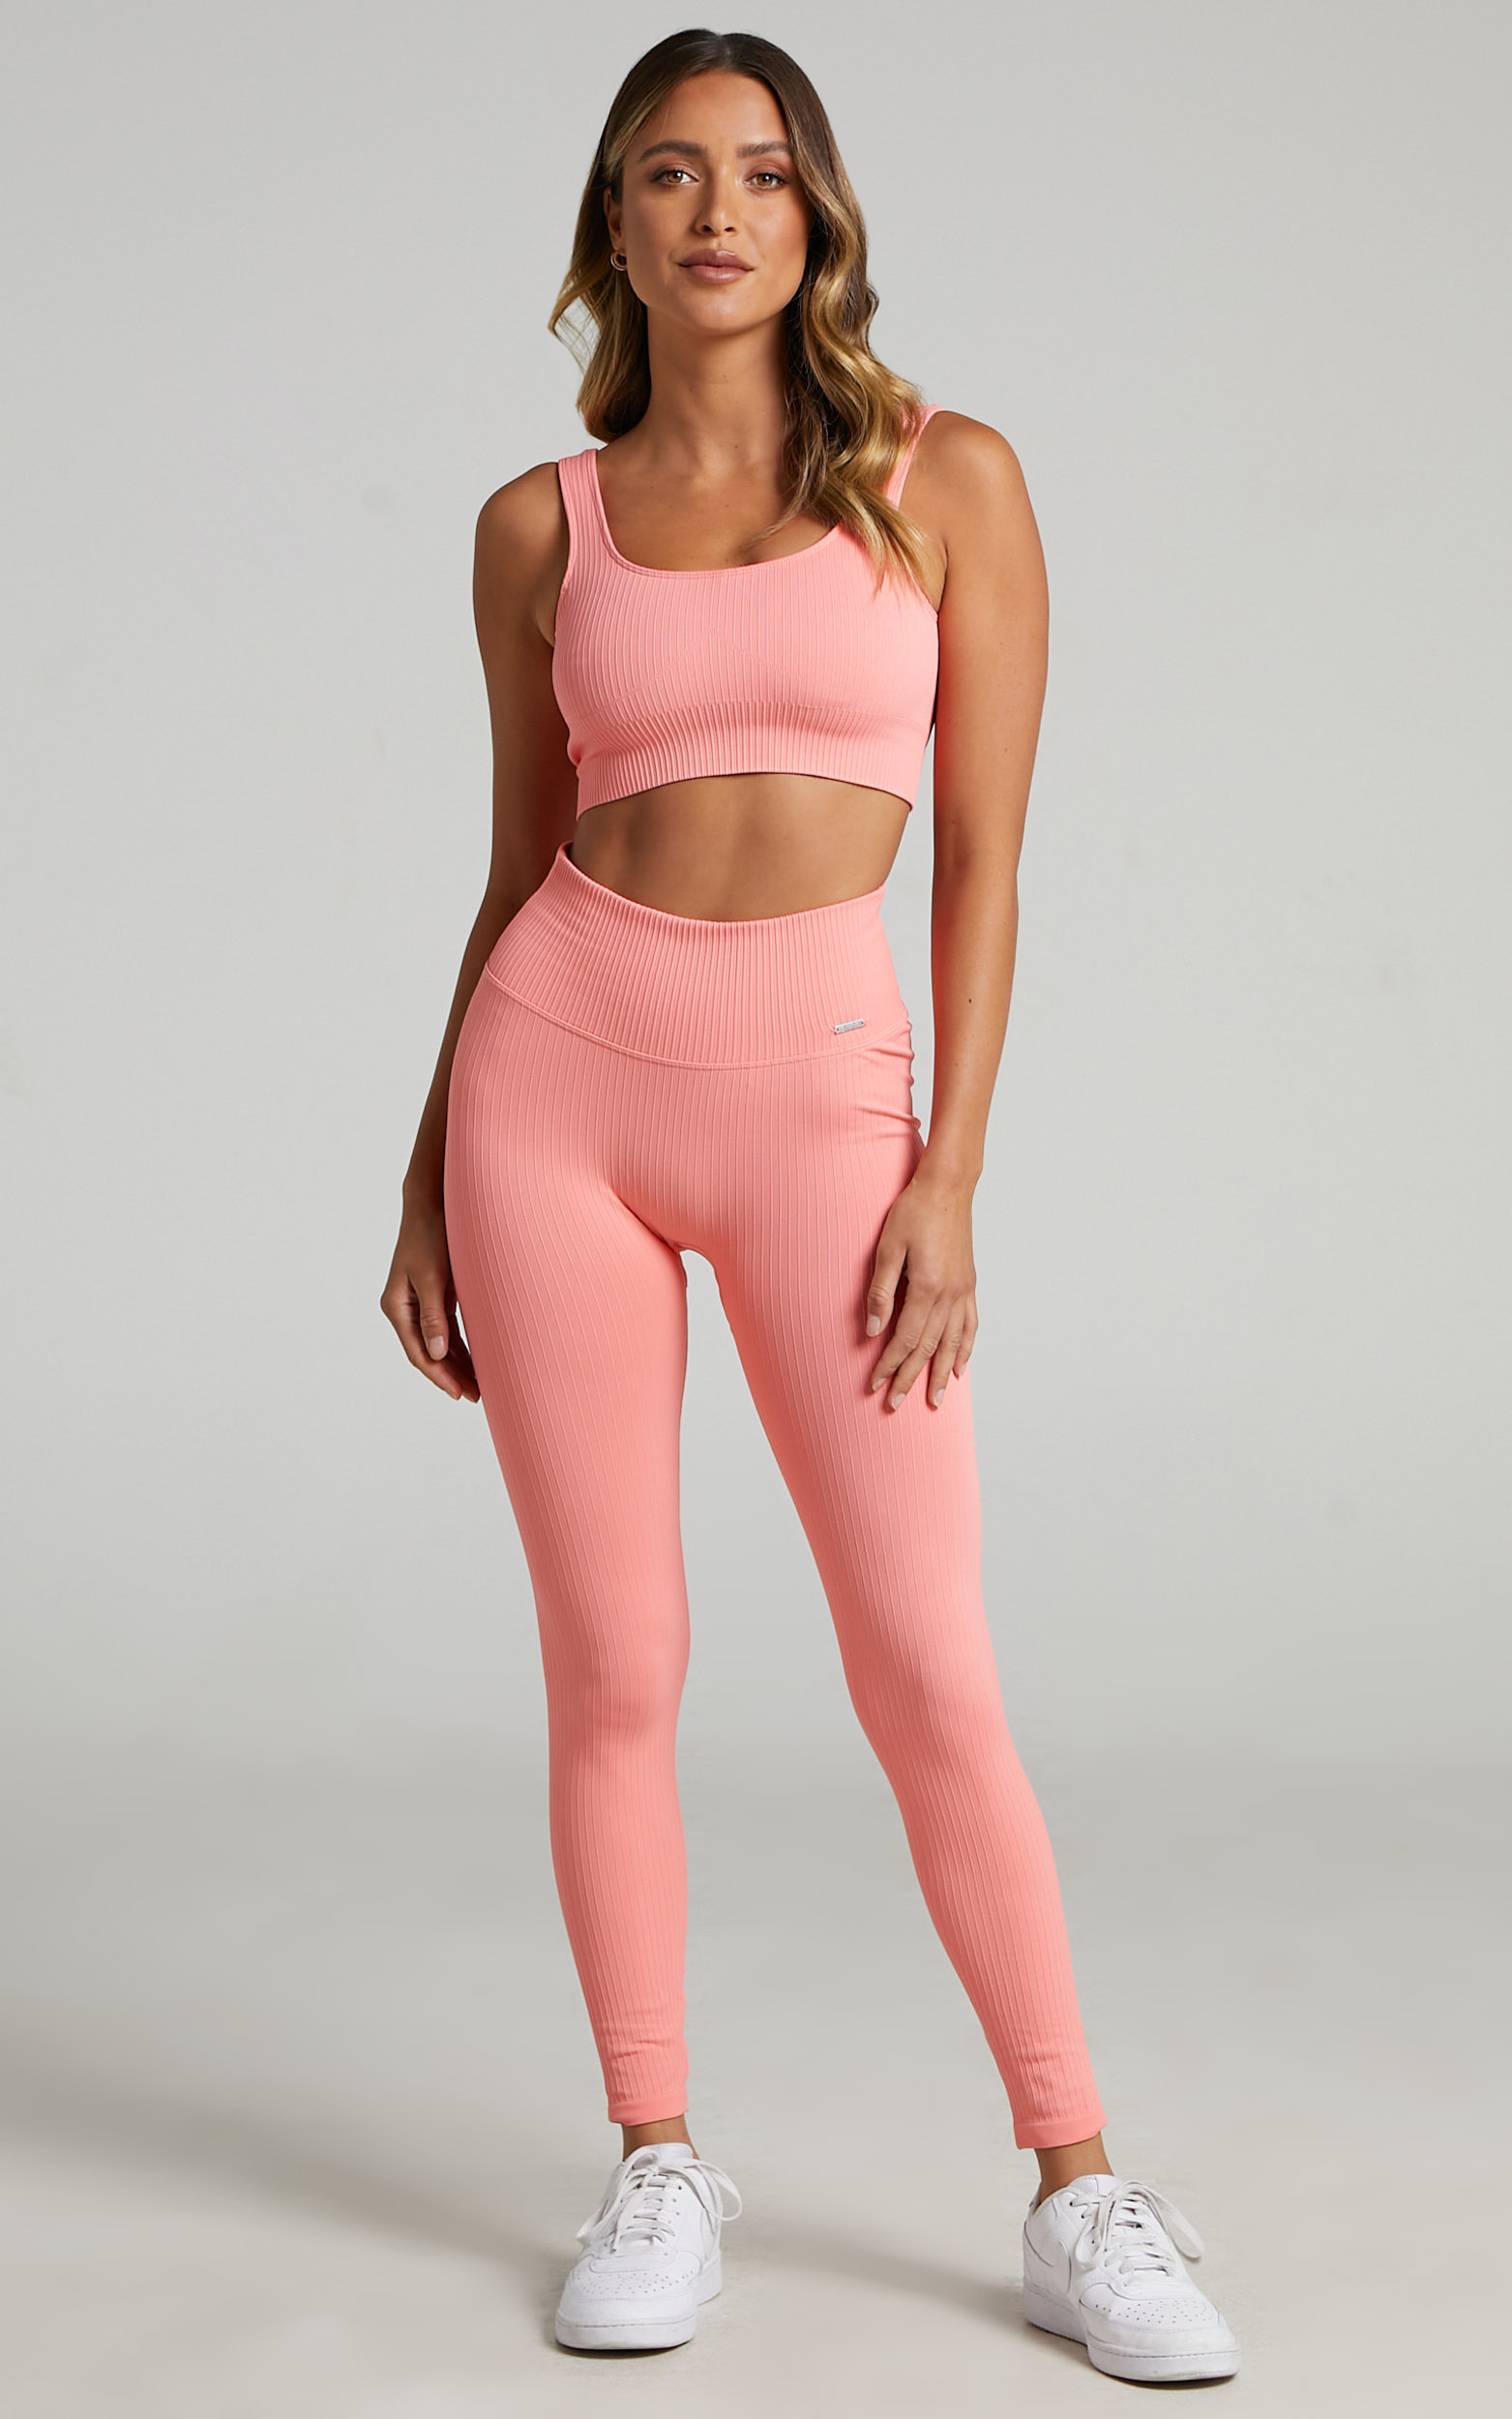 Aim'n - RIBBED SEAMLESS TIGHTS in Coral - XS, PNK1, hi-res image number null